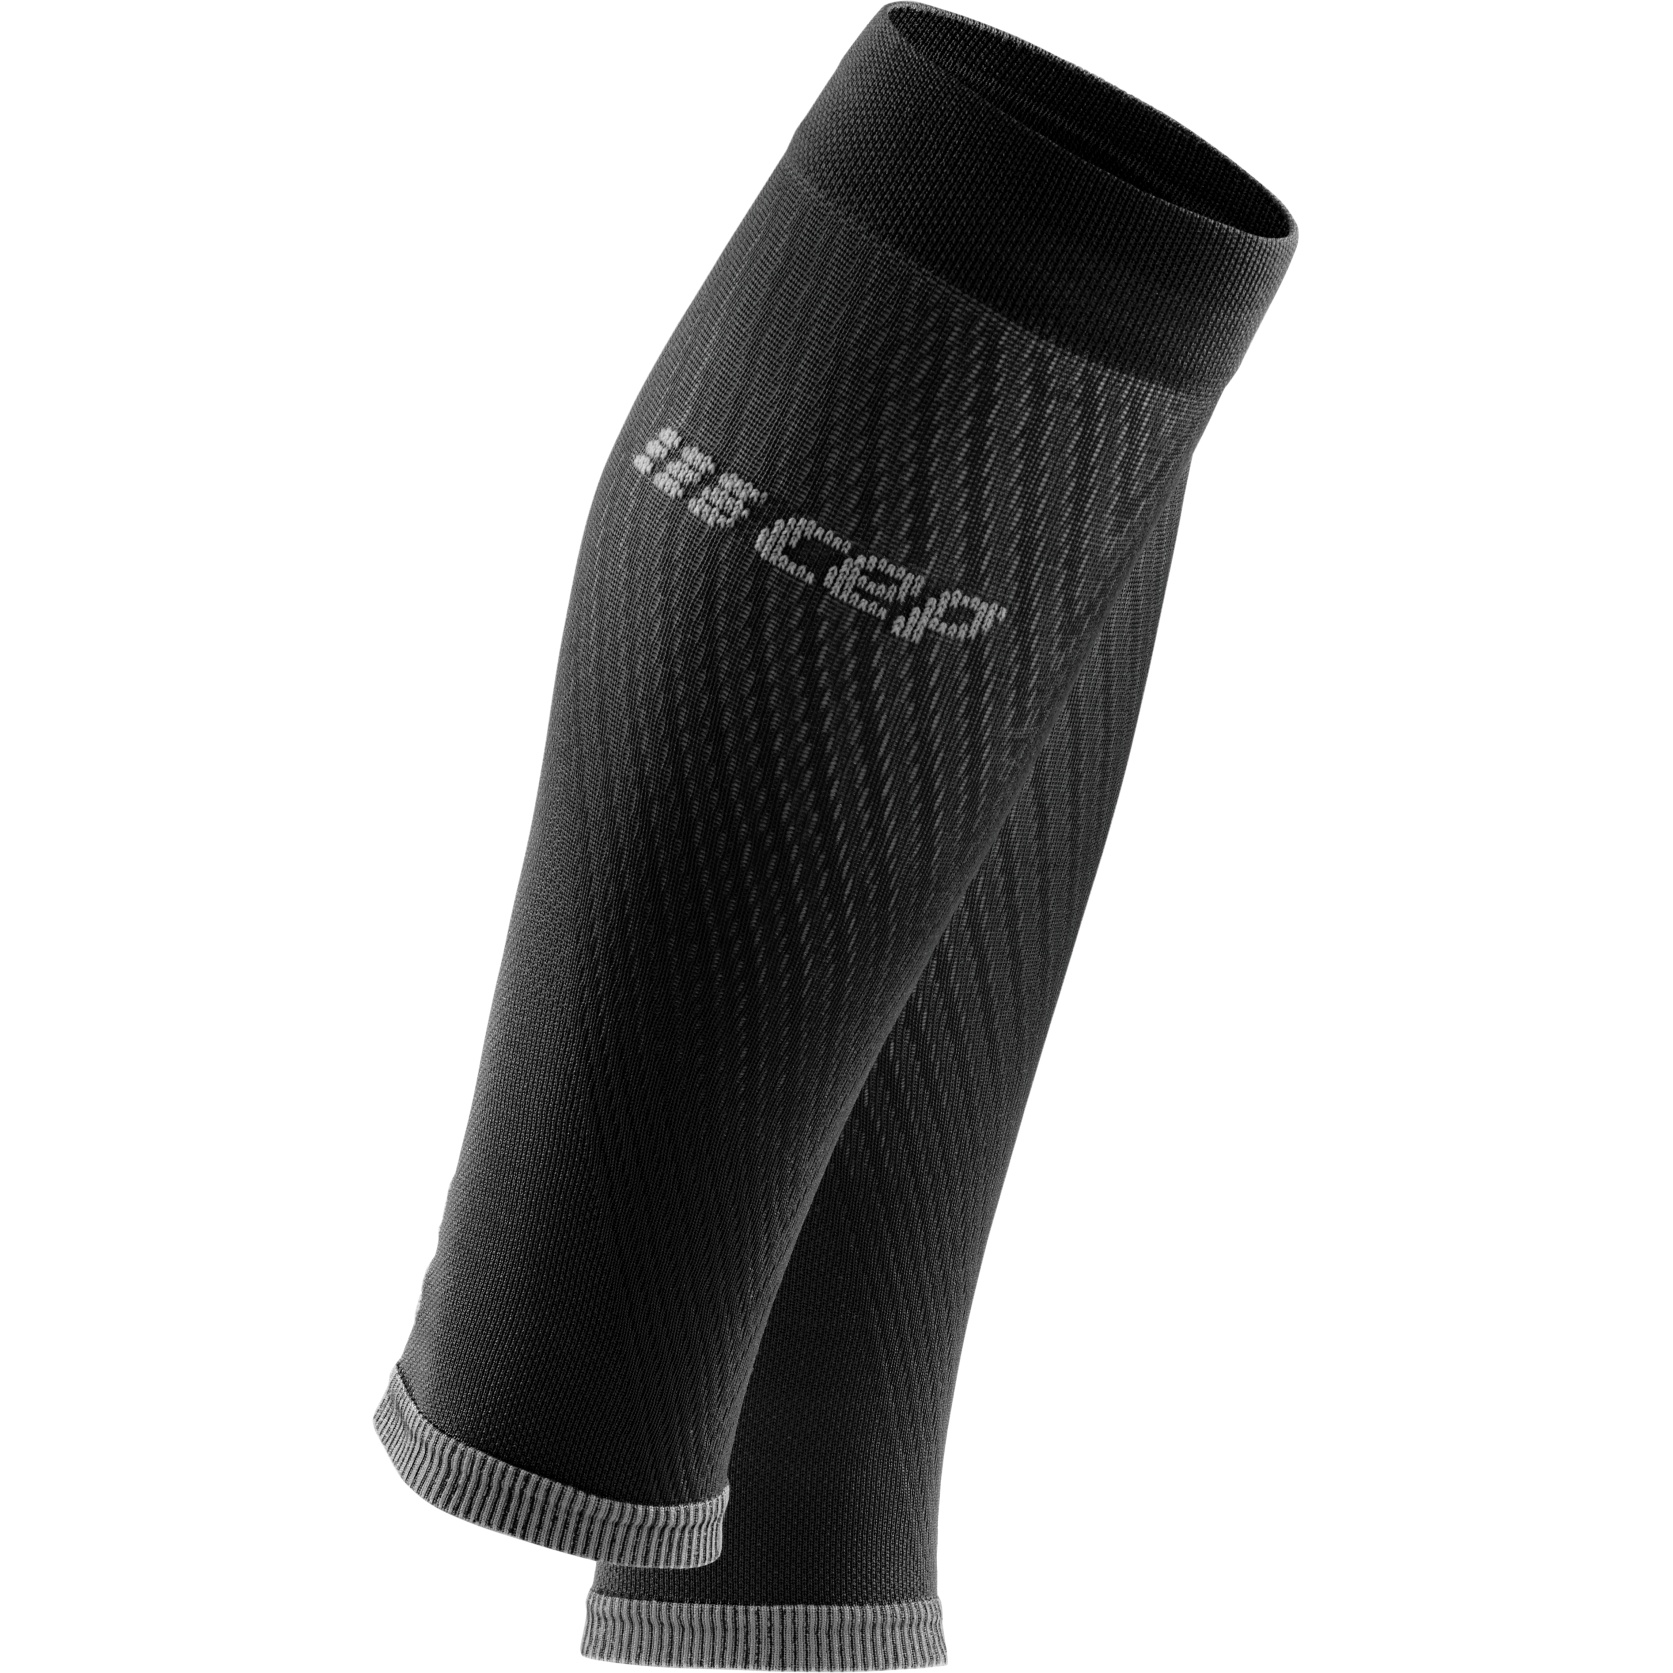 Picture of CEP Ultralight Compression Calf Sleeves - black/light grey